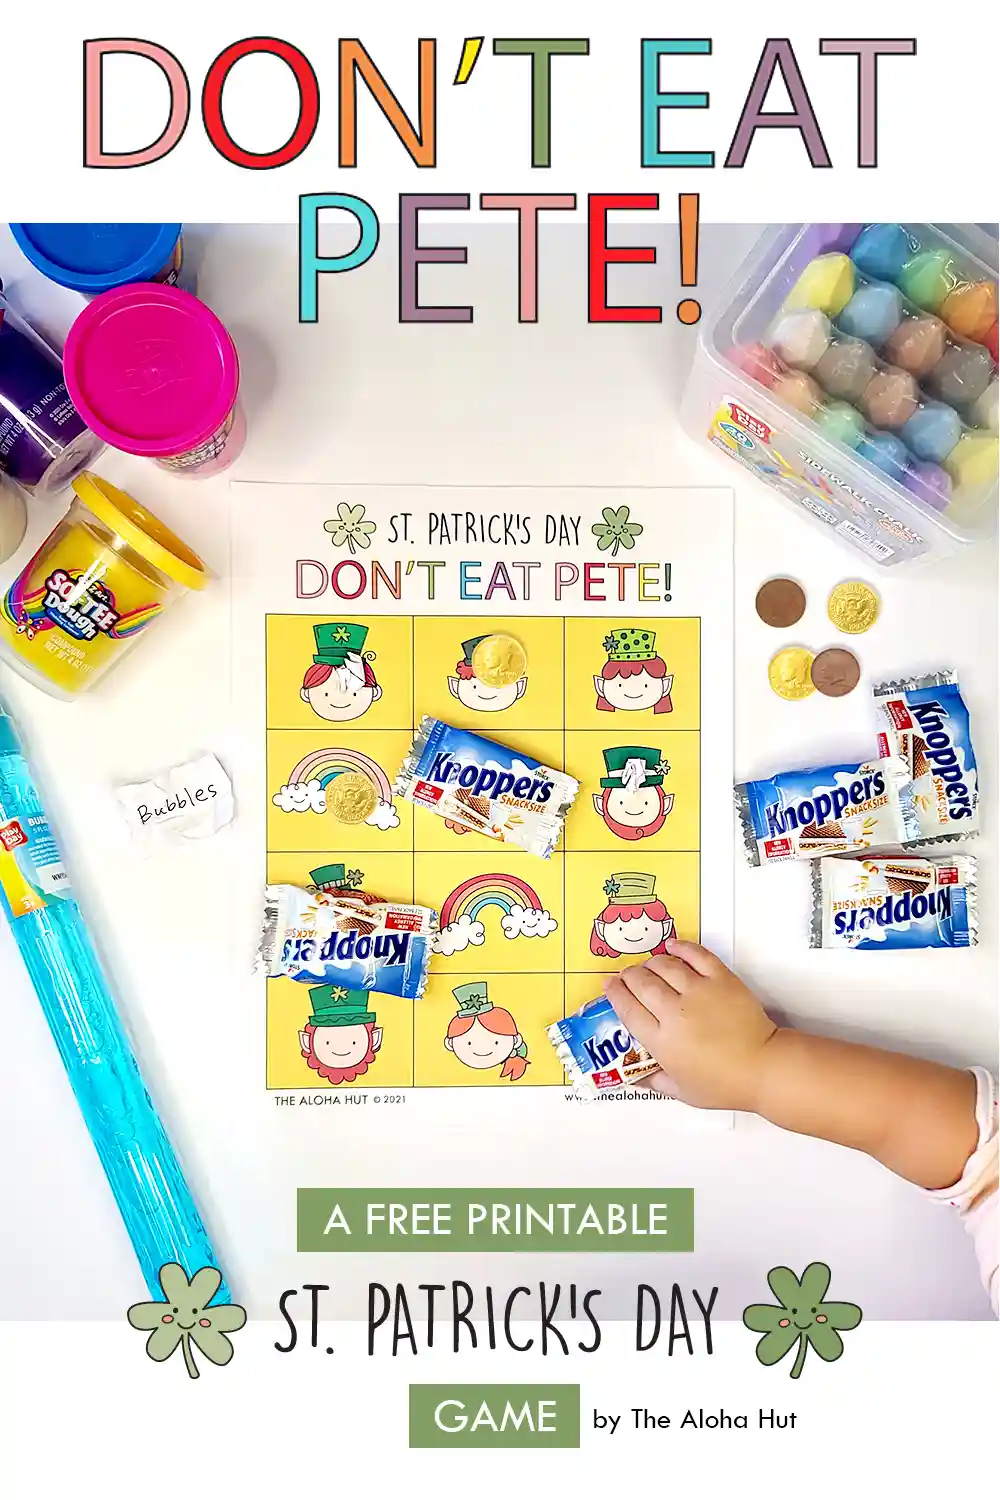 Easy and fun games for St. Patrick's Day. Download our printable Don't Eat Pete game for your next St. Patrick's Day party or play date! This game is super easy to play and great for all ages. You put candy or prizes on each leprechaun and the kids try to not eat the one you decide is "Pete." Instructions on how to play Don't Eat Pete (the leprechaun) are included with this printable St. Patrick's Day game.